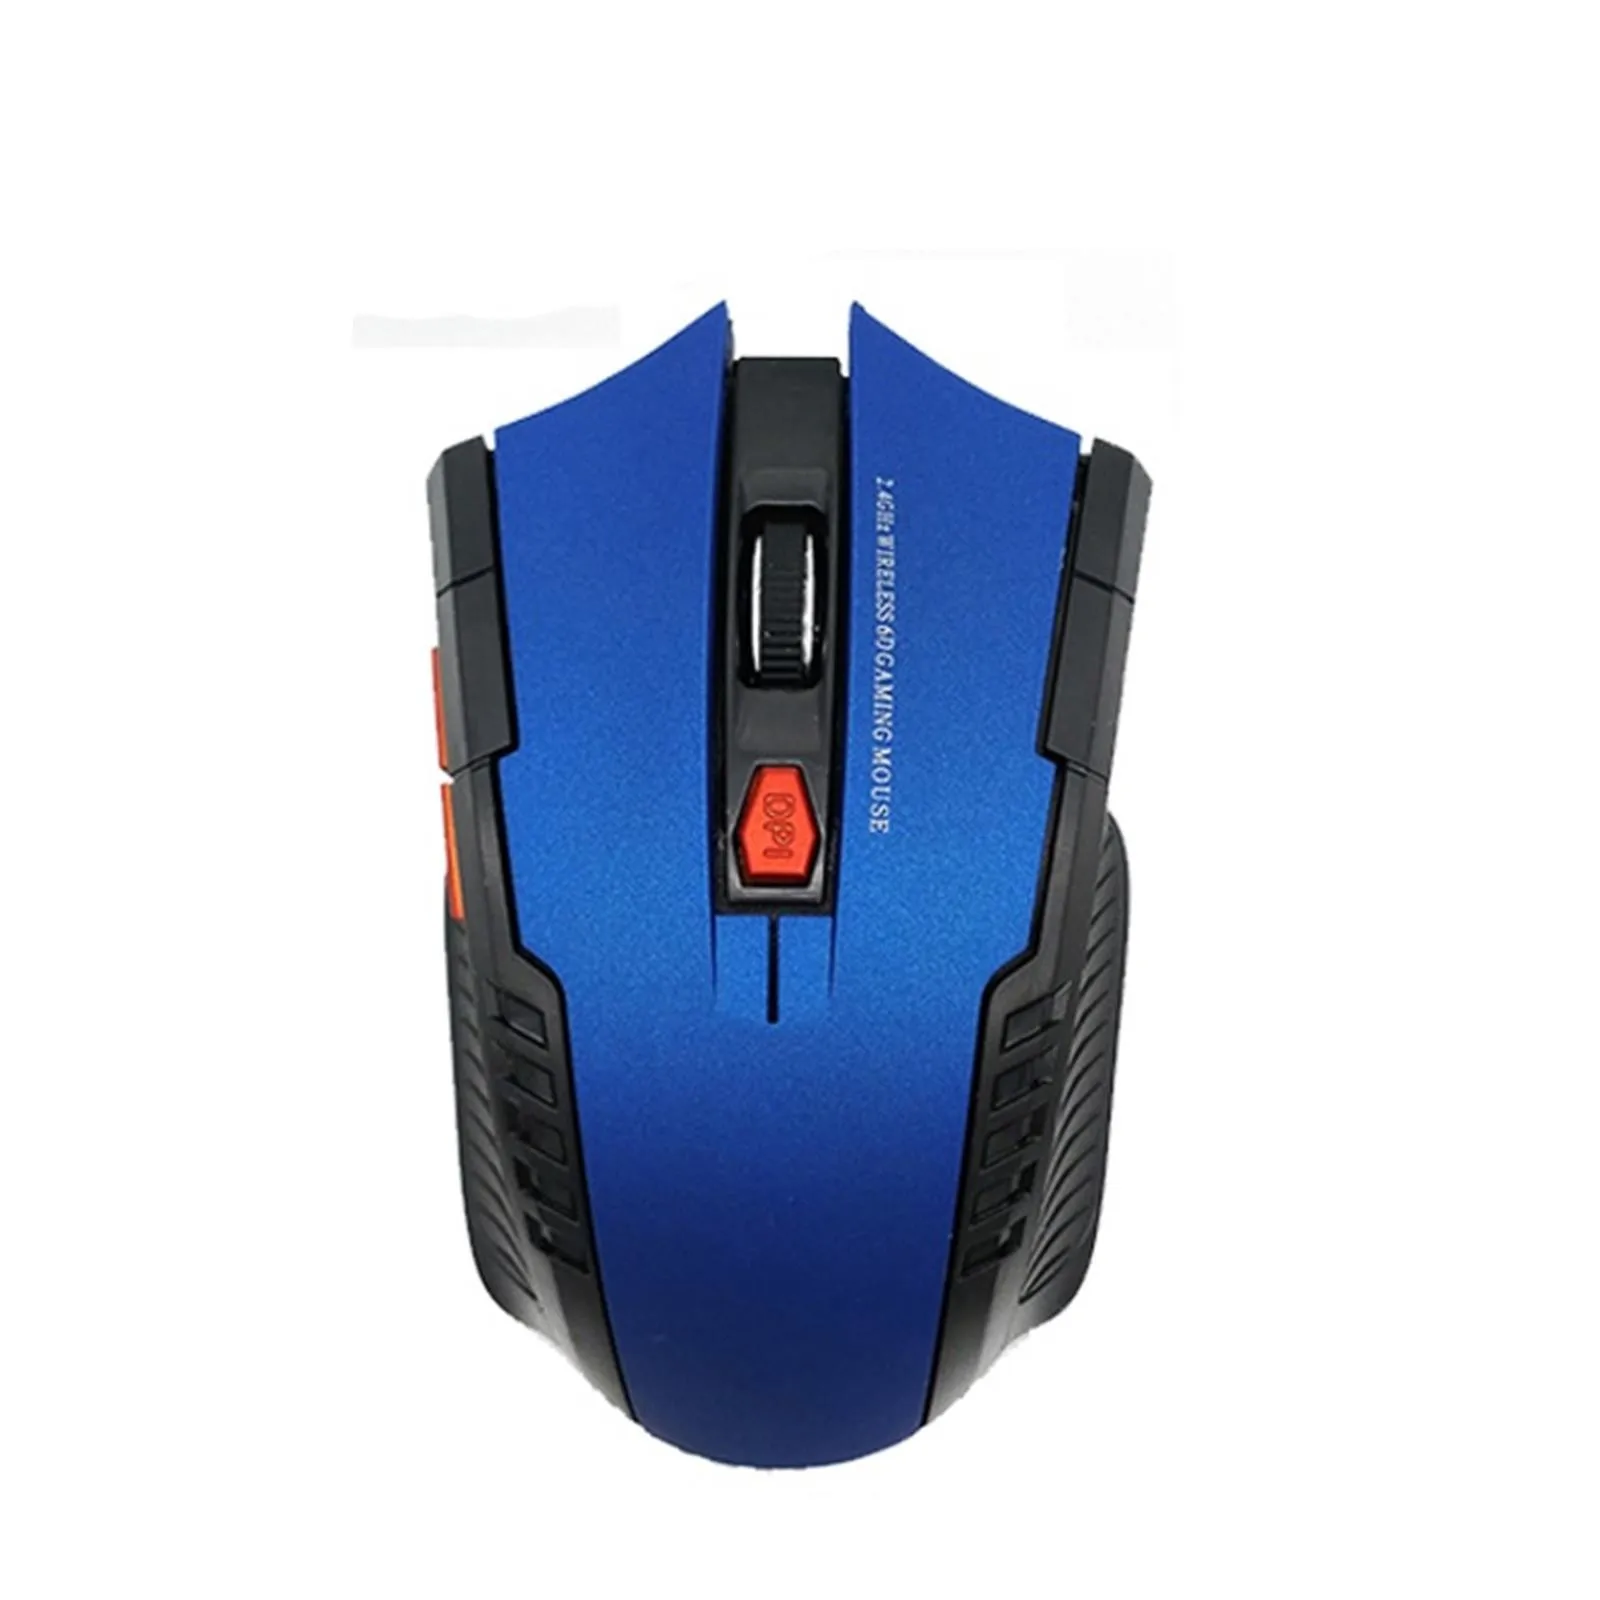 2000DPI 2.4GHz Wireless Optical Mouse Gamer for PC Gaming Laptops New Game Wireless Mice with USB Receiver Drop Shipping Mause silent wireless mouse